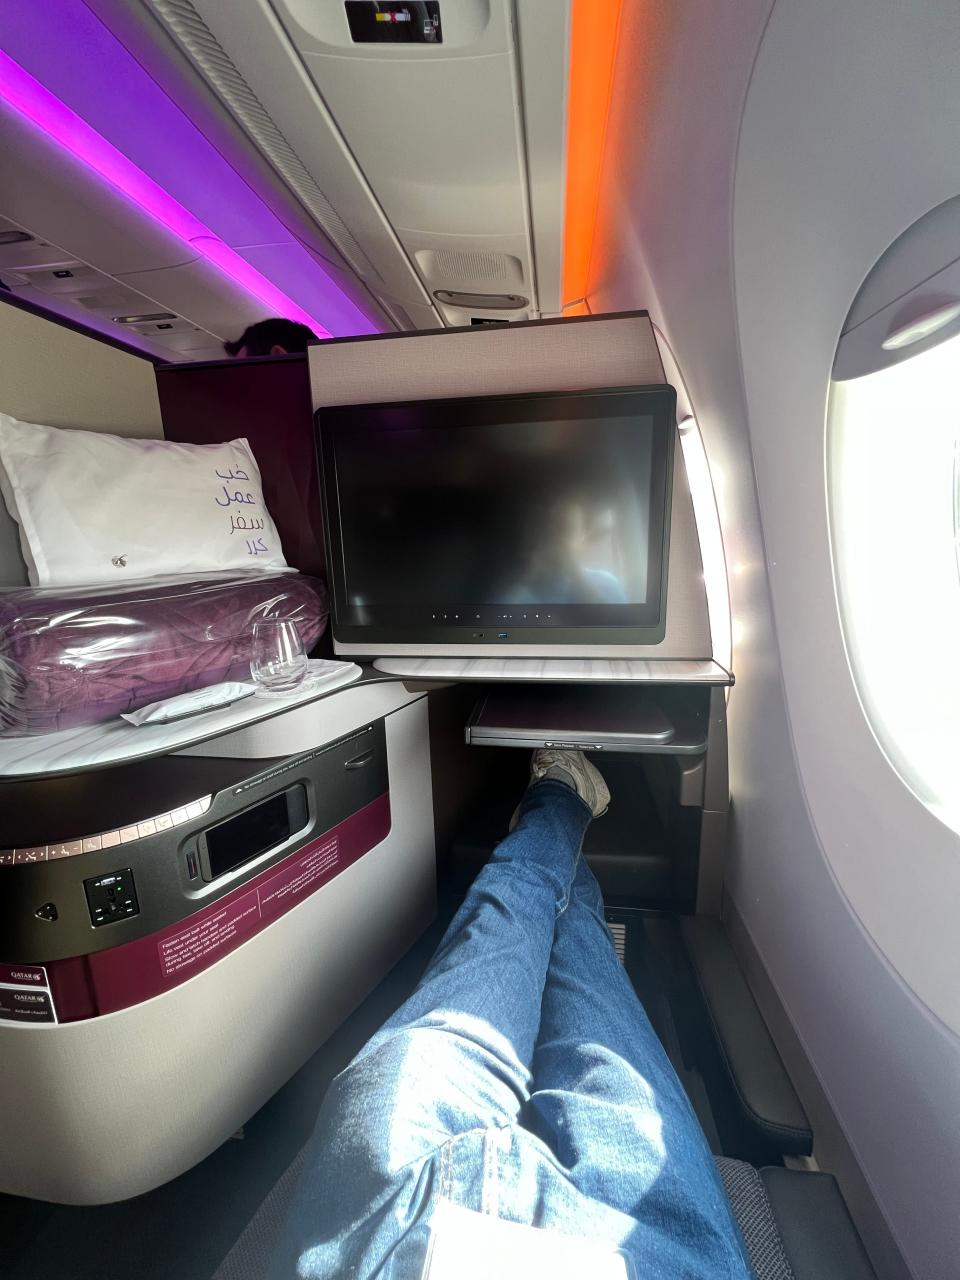 A passenger wearing jeans stretches his legs out on the Qatar A350 business class seat, with the large screen and branded cushions visible